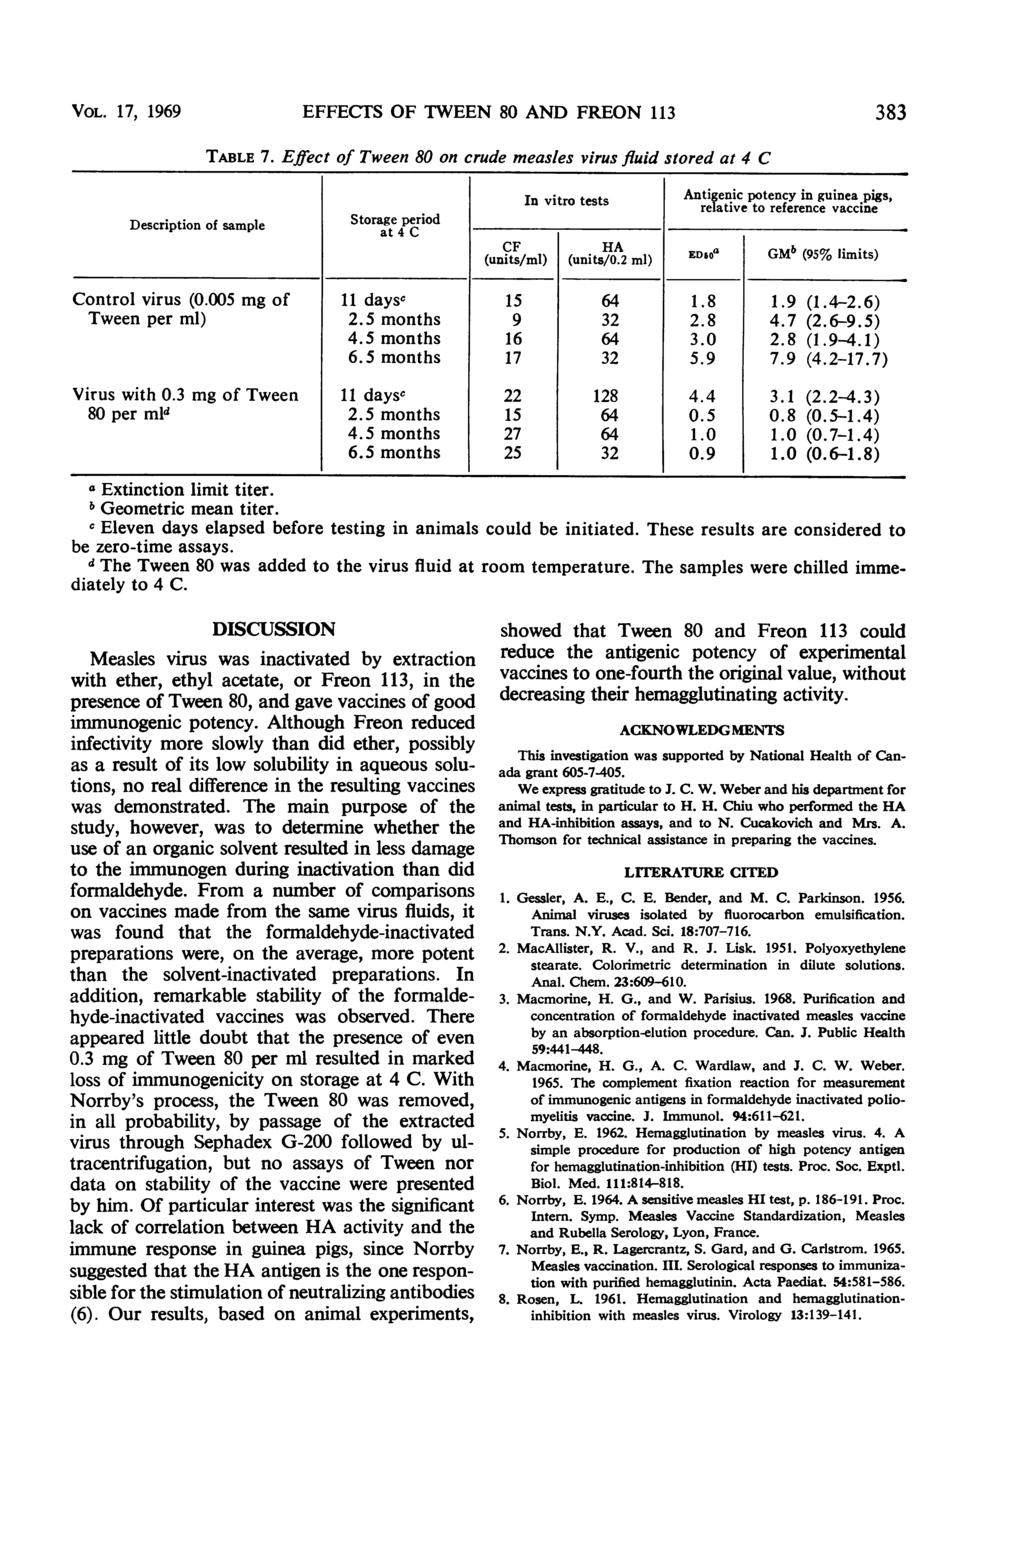 VOL. 17, 1969 EFFECTS OF TWEEN 80 AND FREON 113 383 Description of sample TABLE 7.